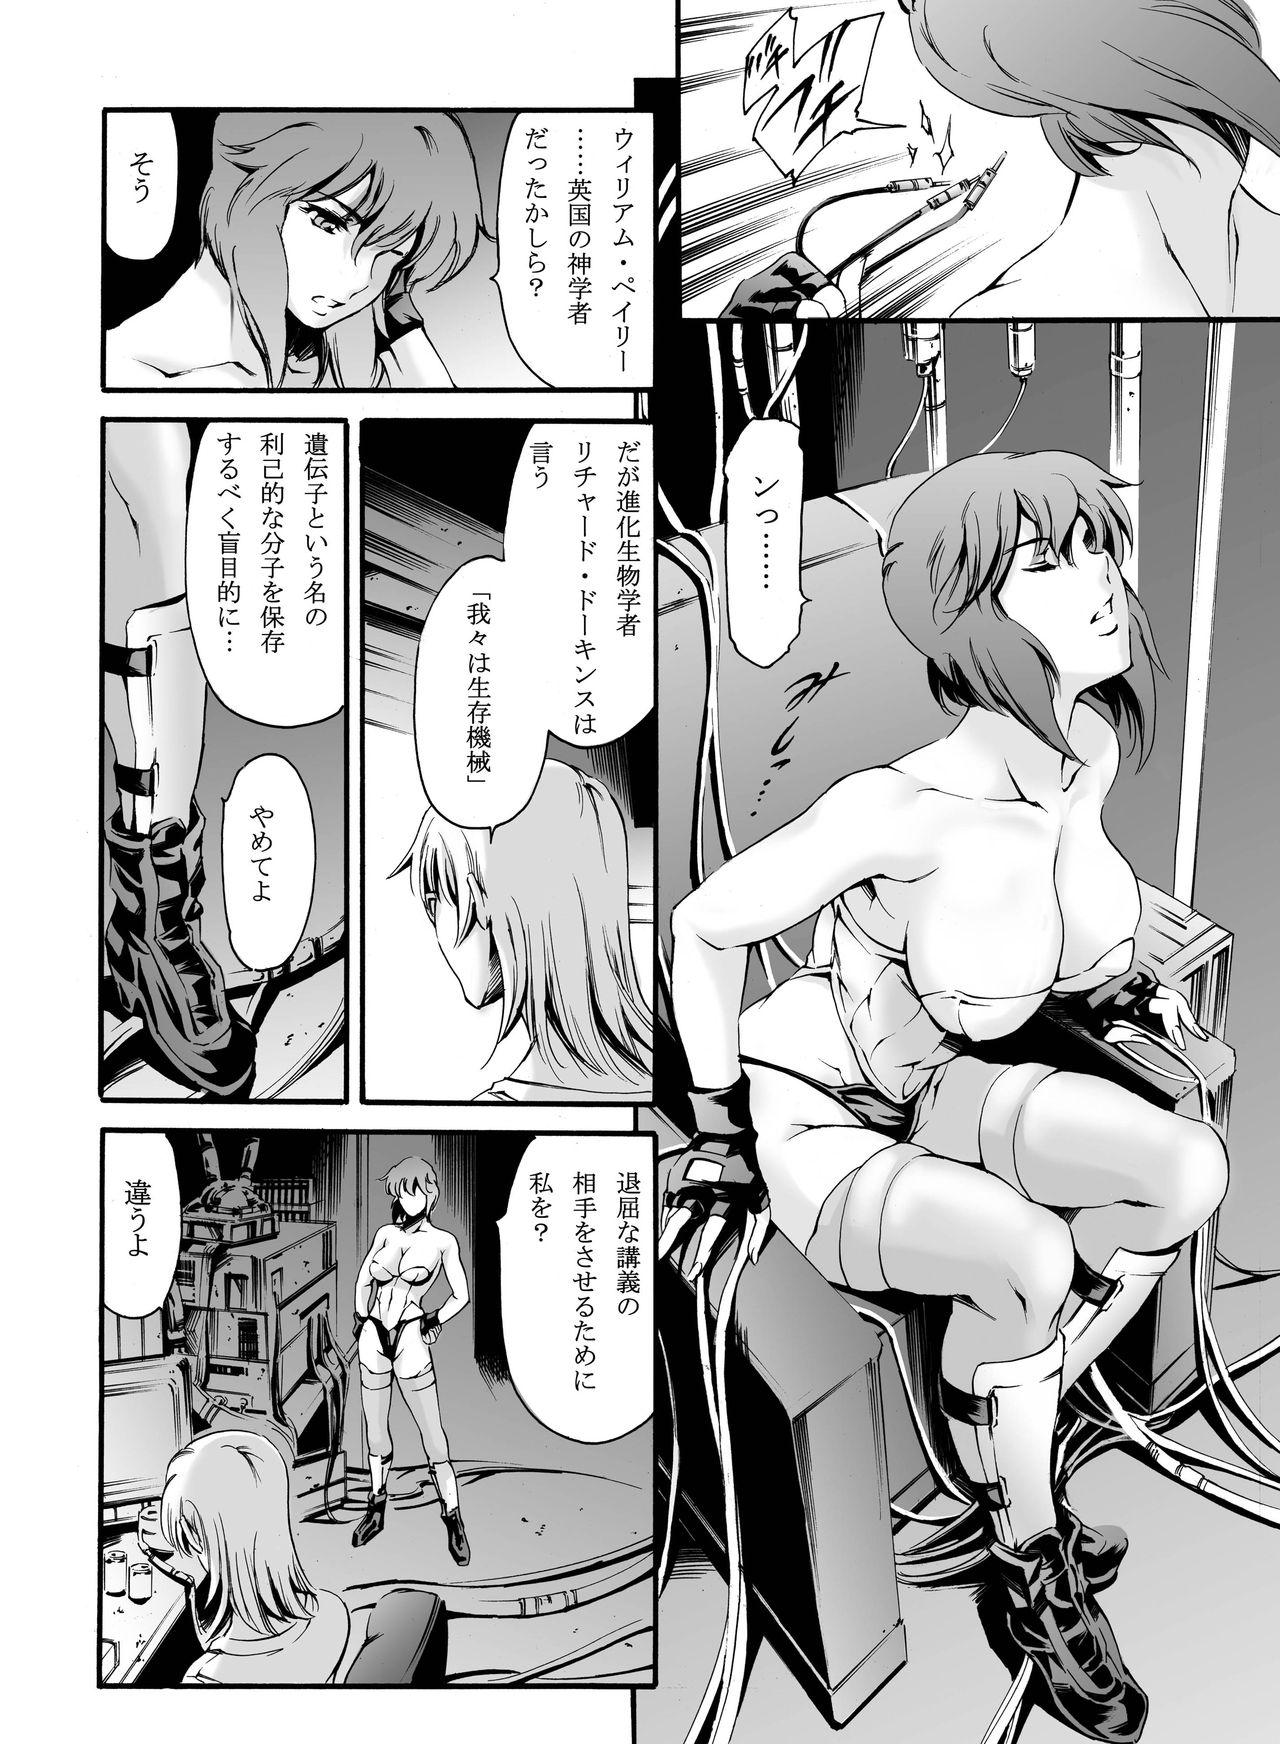 Sex Toys Derenuki Vol. 1 - Ghost in the shell Interview - Page 5